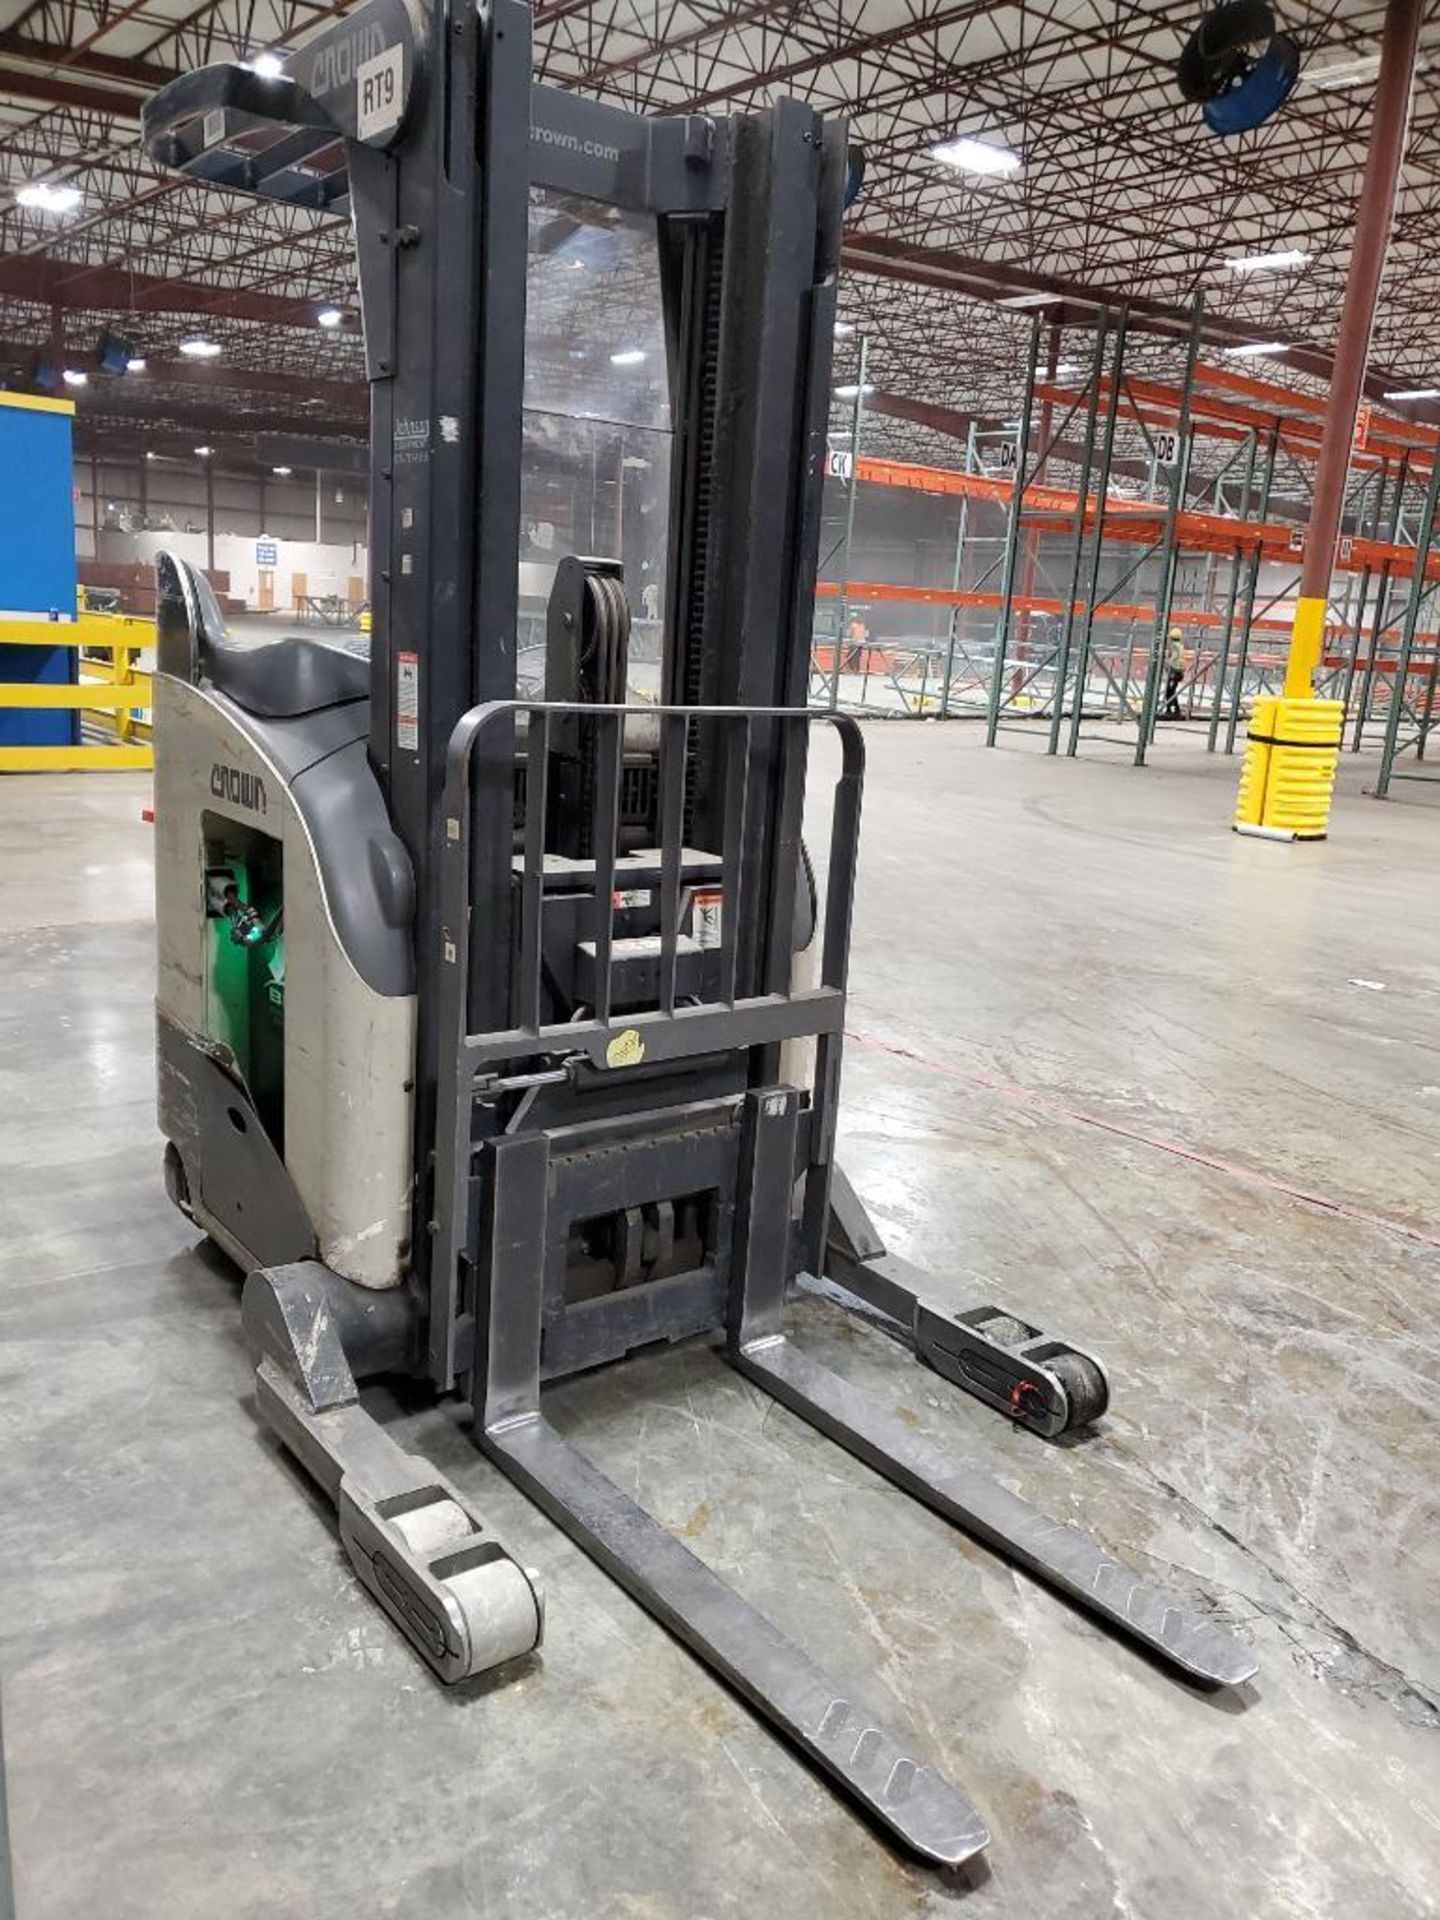 2007 RR 5200 Series Electric Reach Truck, Model RR5220-35, S/N 1A317340, 36V, 3,500 LB. Capacity, 19 - Image 4 of 13